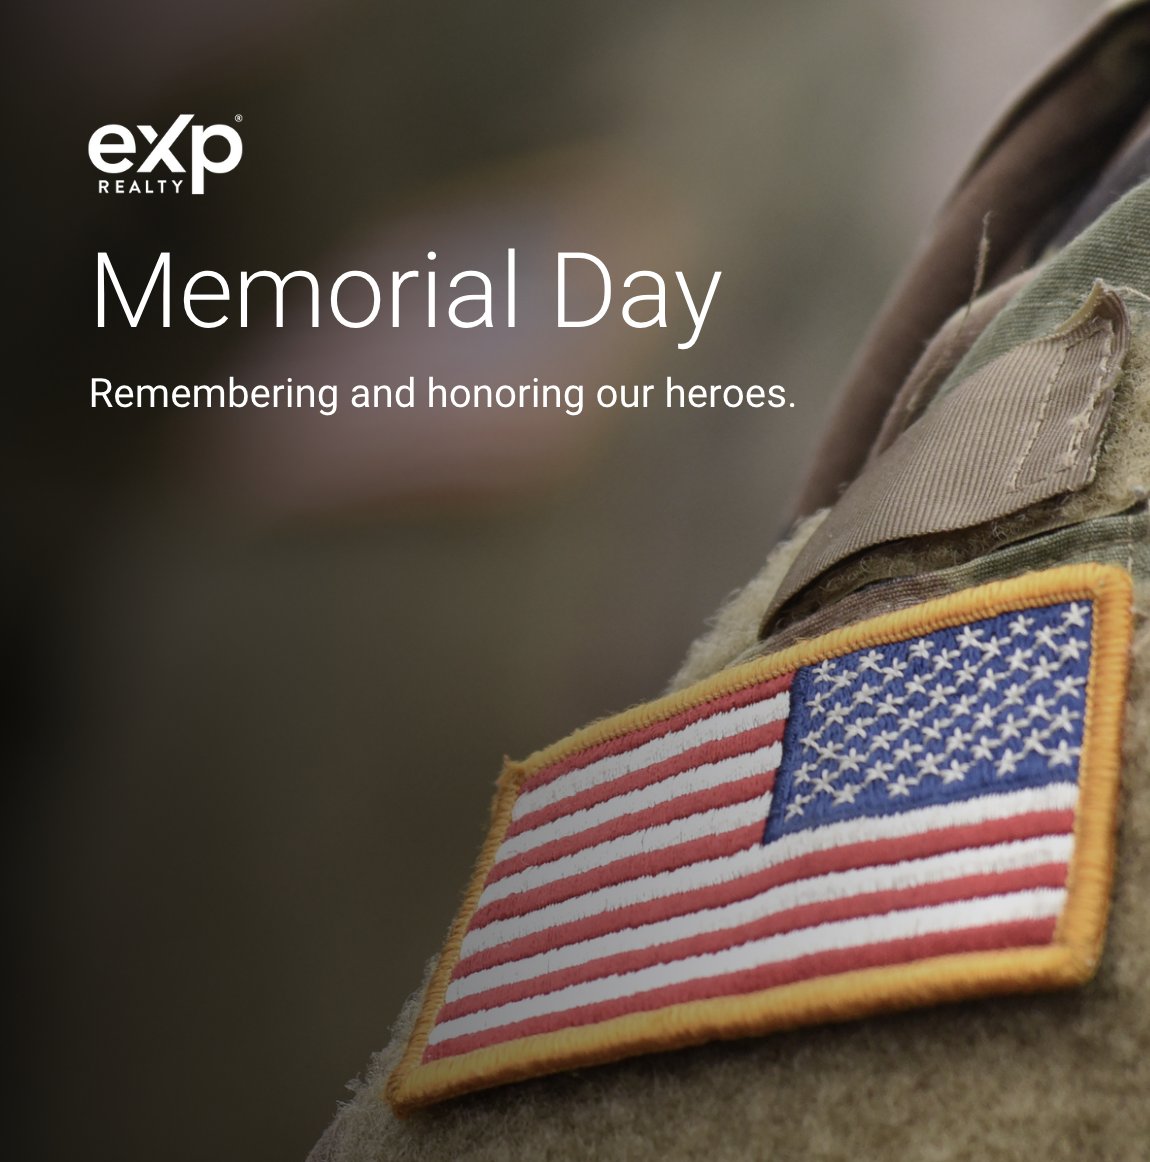 On this Memorial Day, we pause to remember and honor those who have sacrificed for our country. Their bravery and dedication are never forgotten. Today, let's take a moment to reflect and appreciate their service.